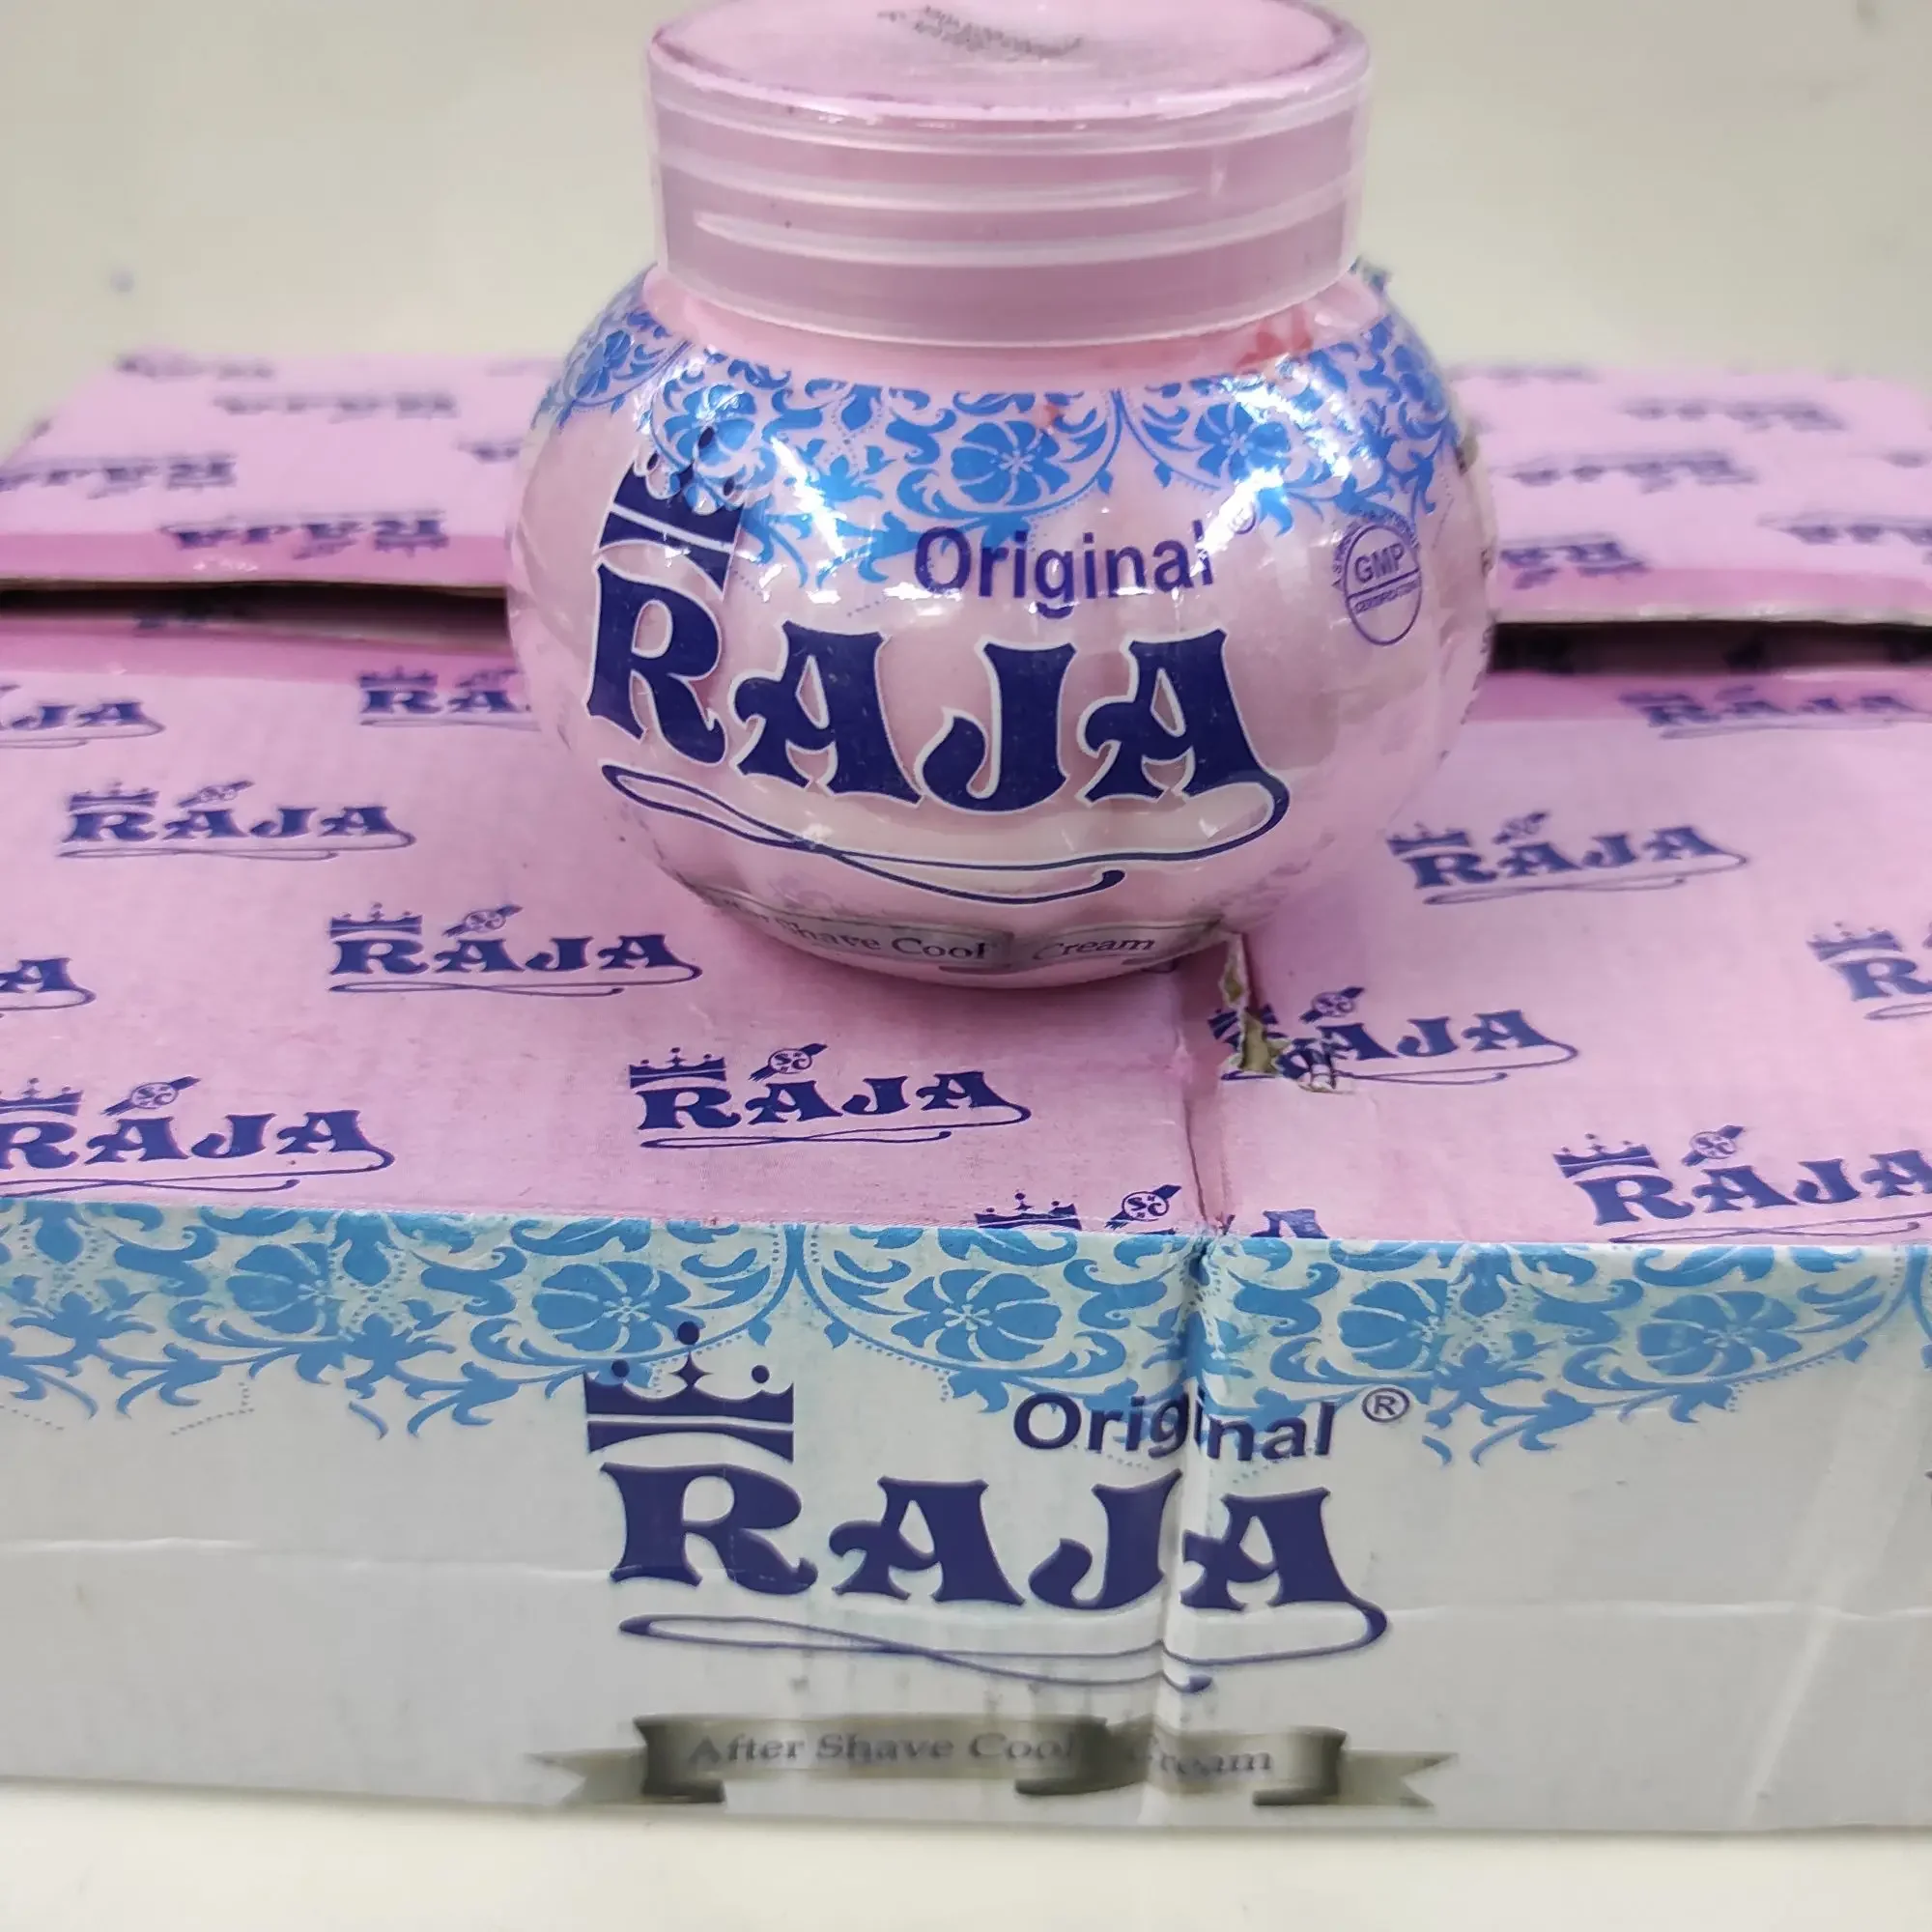 RAJA AFTER SHAVE COOL CREAM 6PC*200G